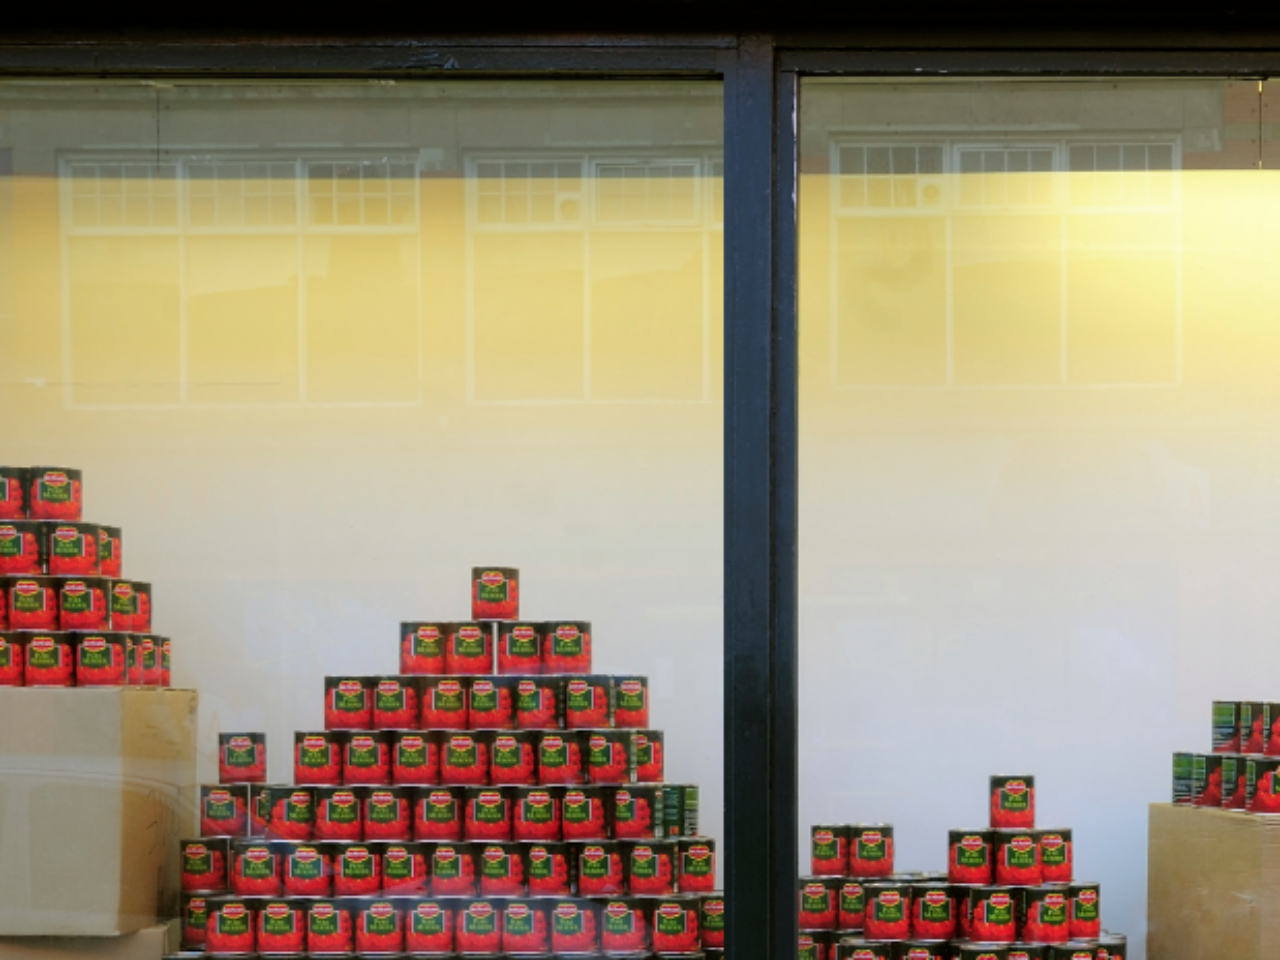 Stacked in large groups, are tinned tomatoes in a window display